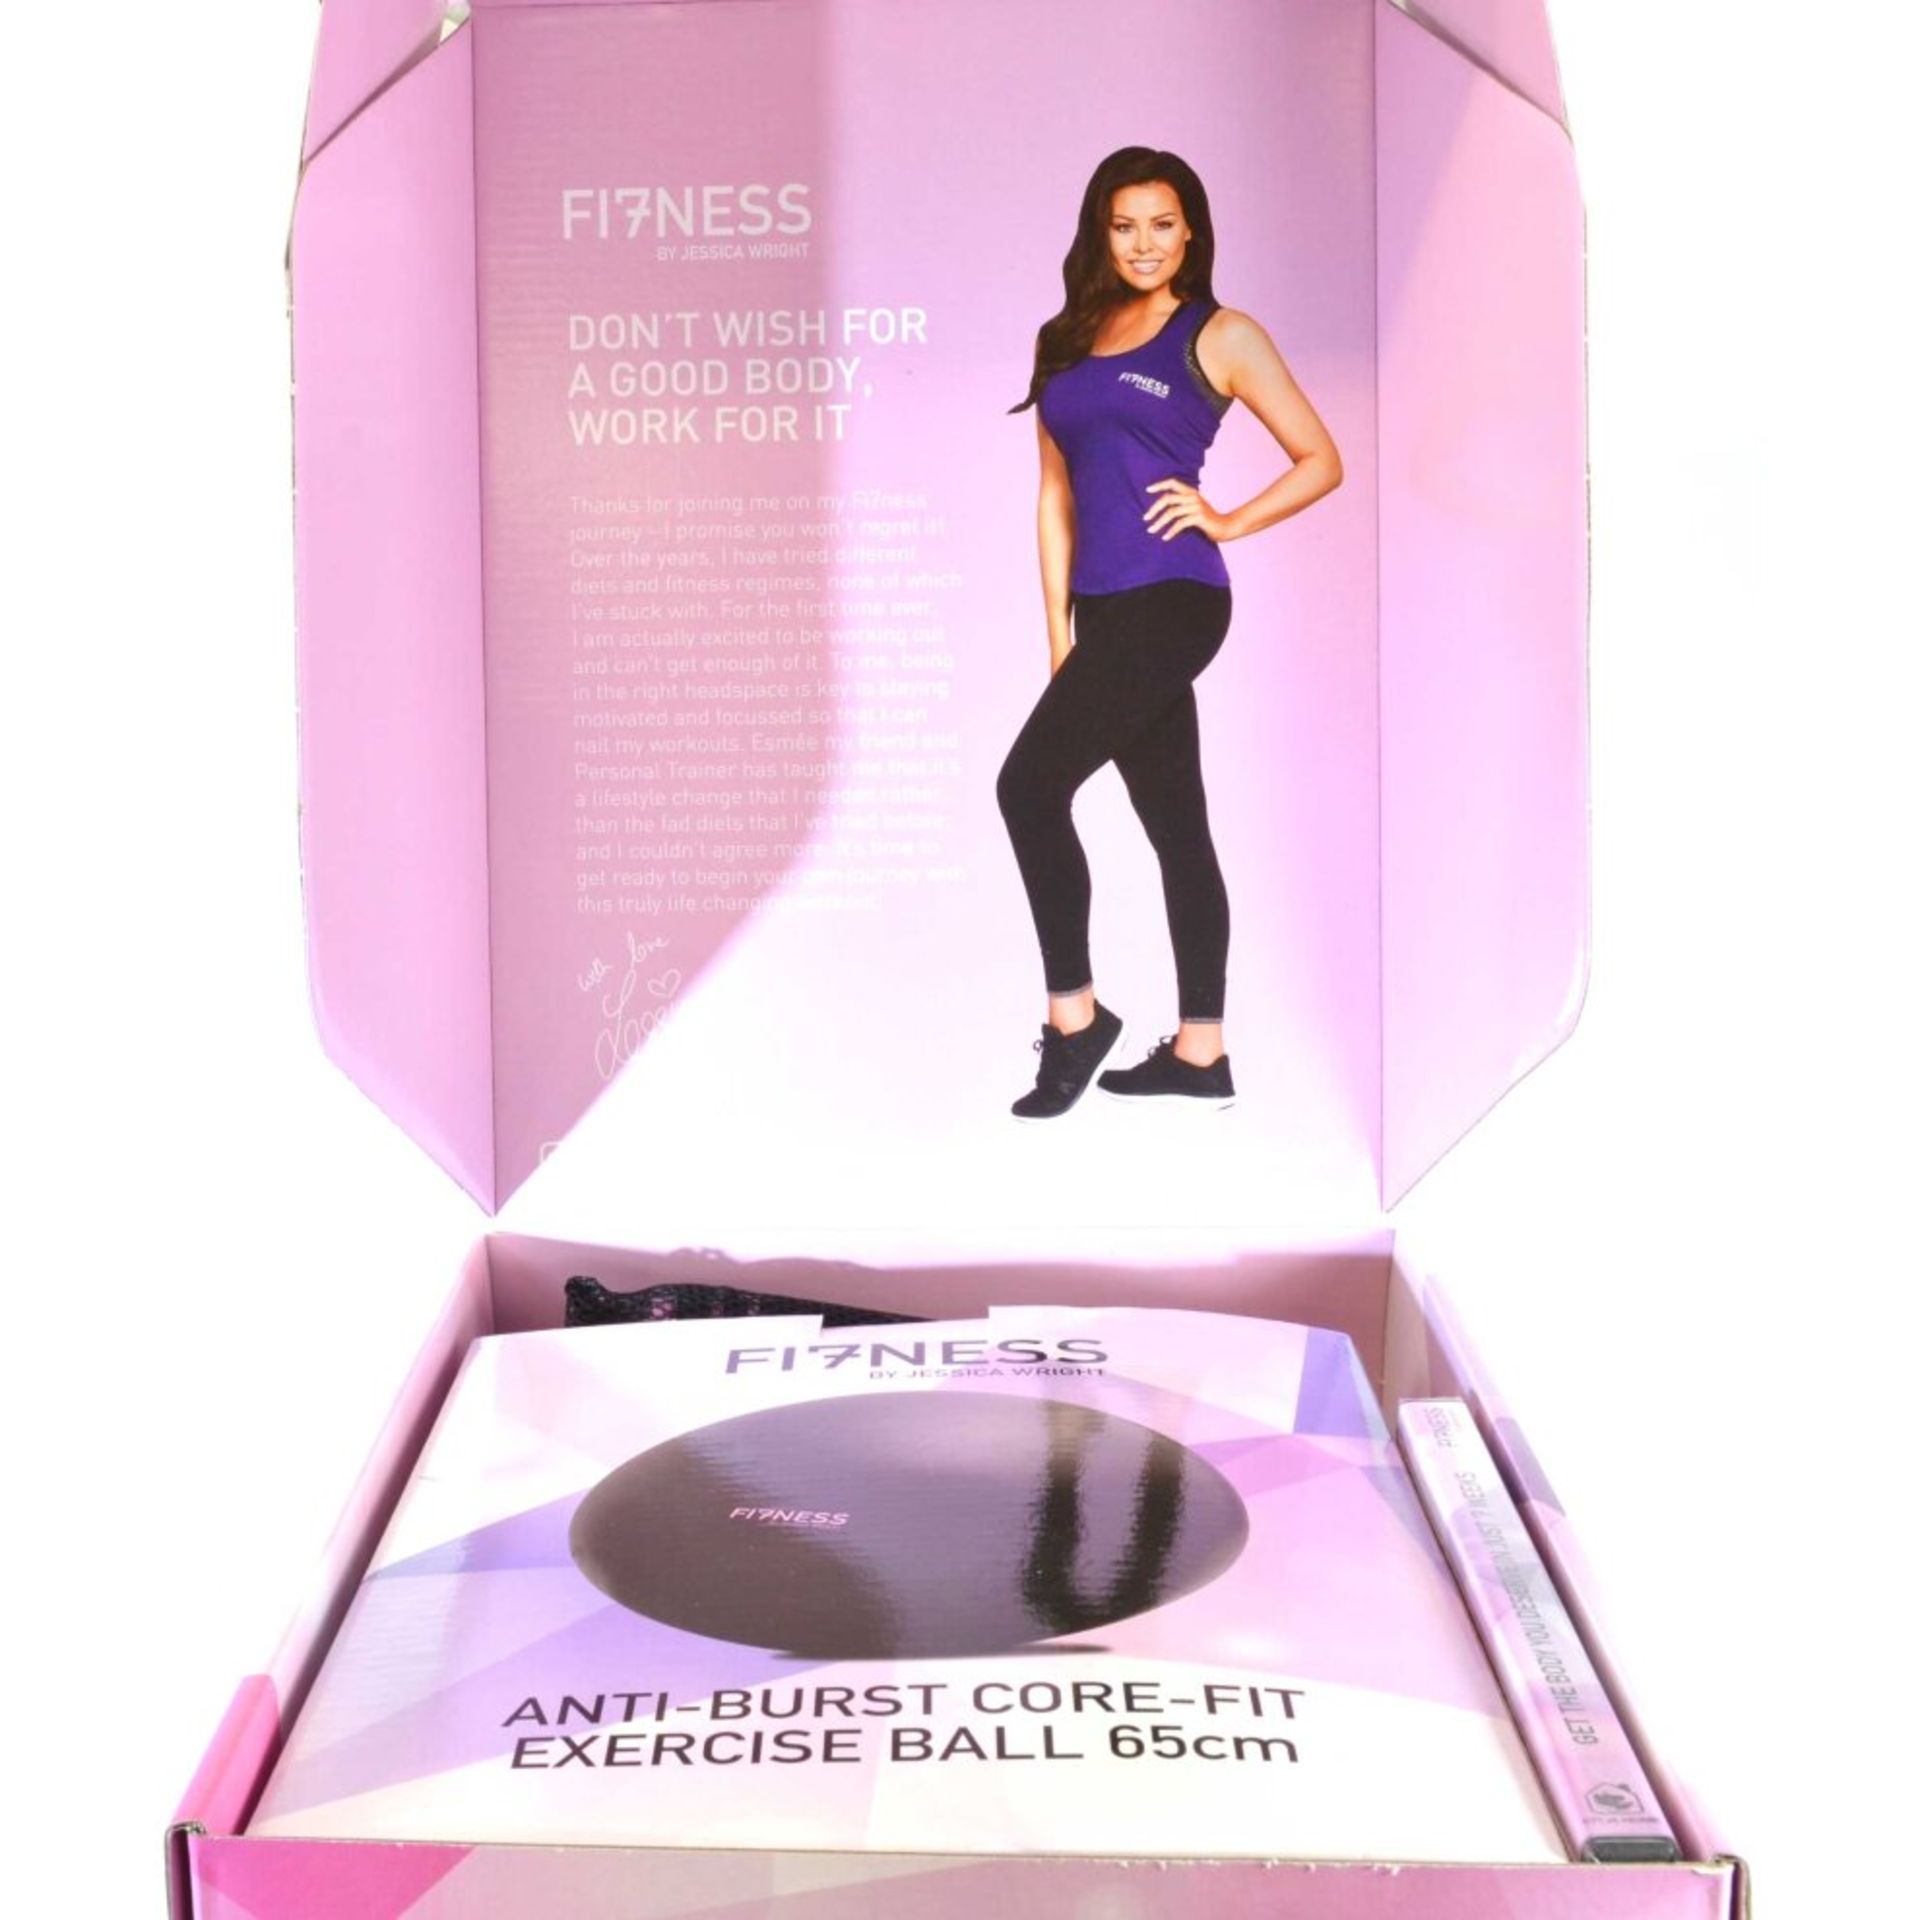 RRP 17.99 ea 10 x Fi7ness by Jessica Wright Complete 7 Week At Home Fitness Workout Programme - Image 4 of 4